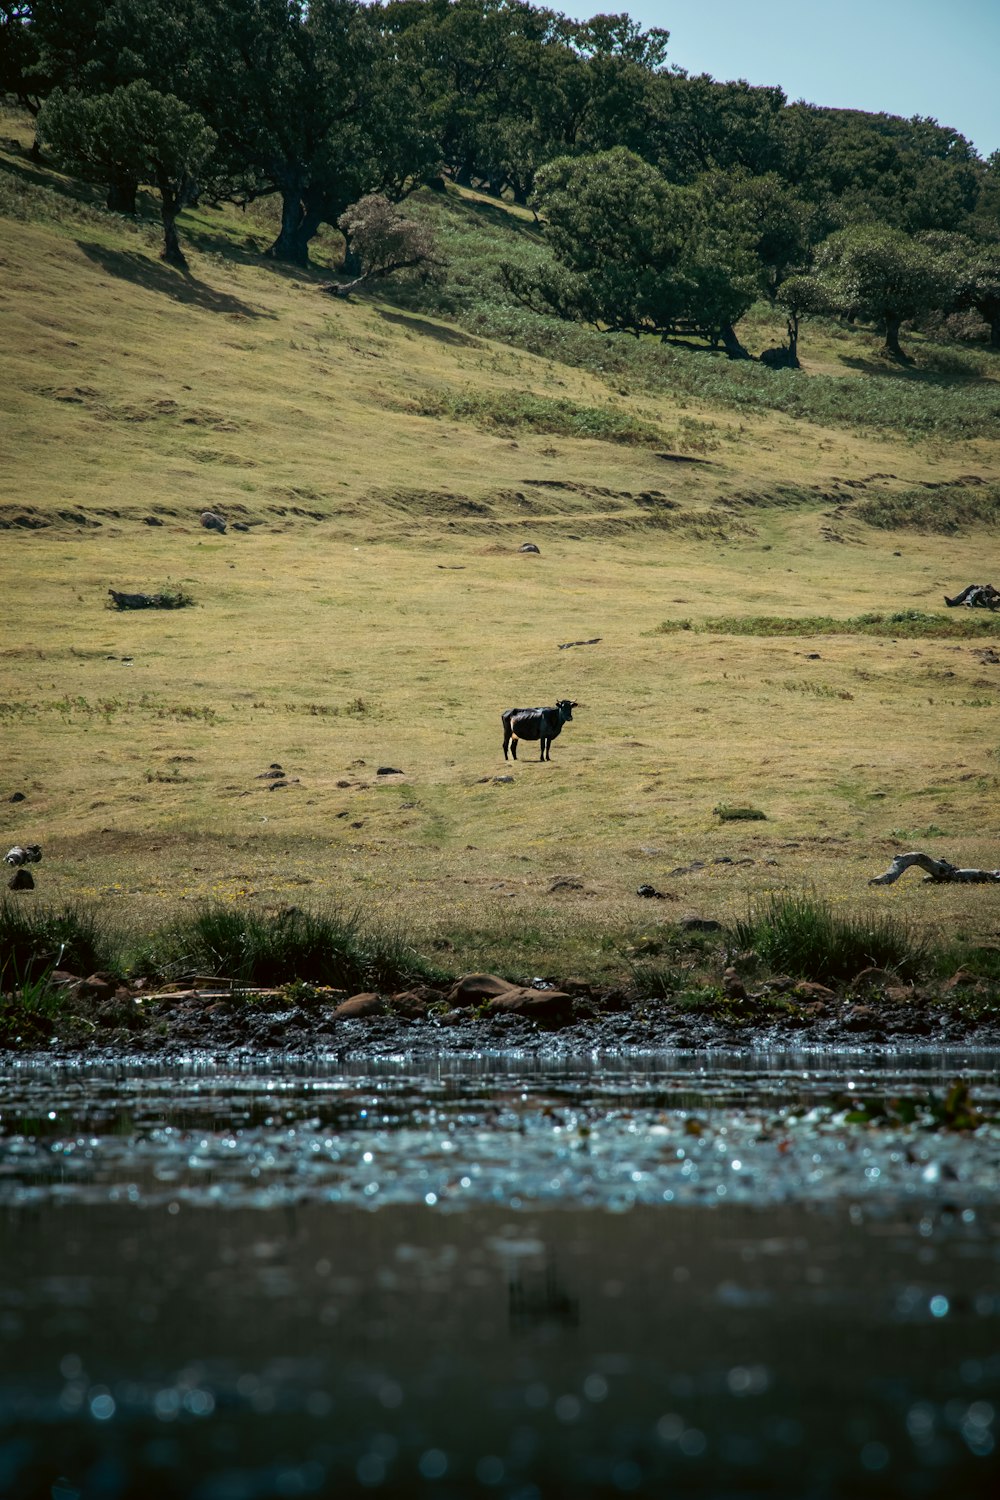 a cow standing in a grassy field next to a river